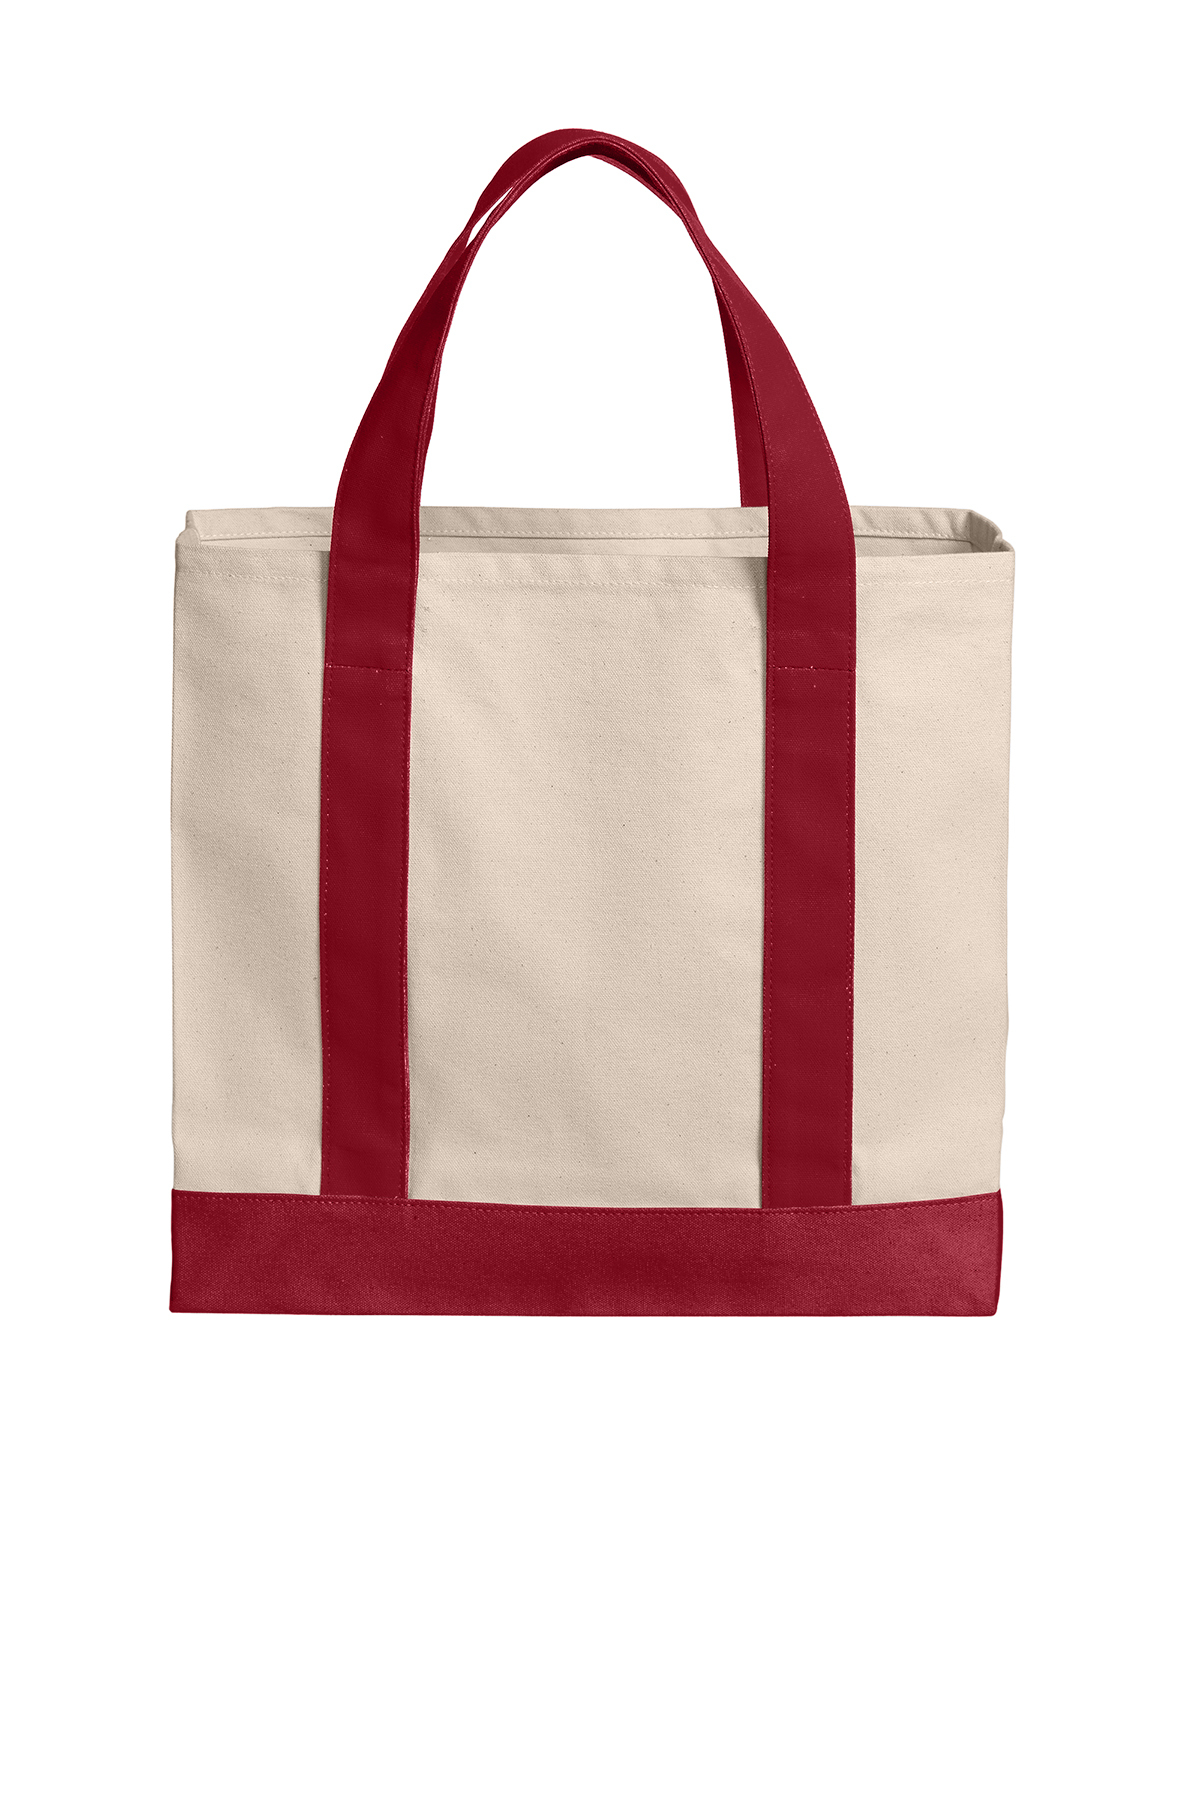 Port Authority Cotton Canvas Two-Tone Tote | Product | SanMar